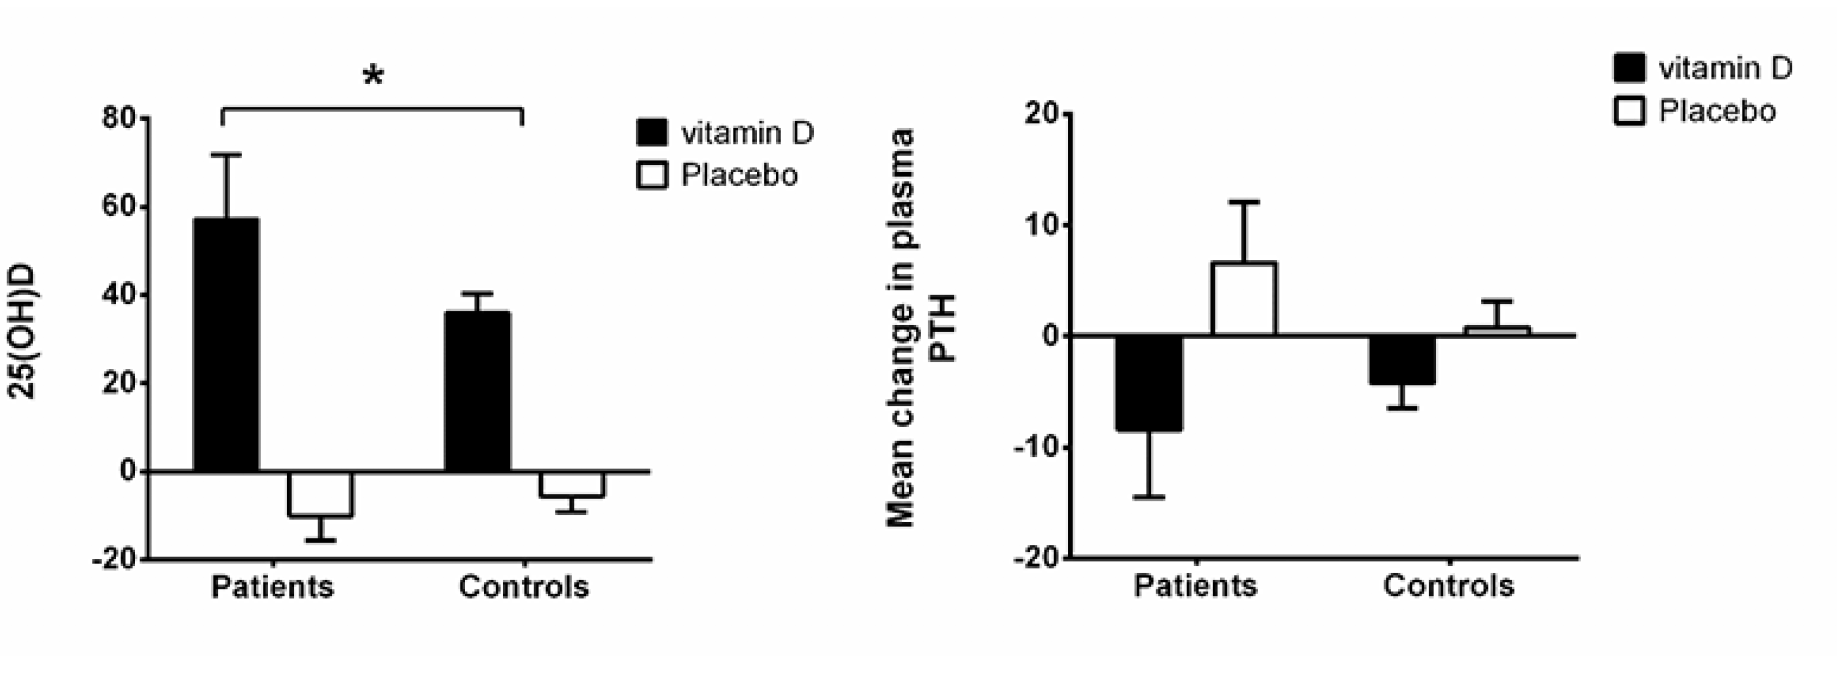 Figure 2 Absolute changes in calcitropic hormones (25-OH-vitamin D and PTH) from baseline to 12 months among citalopram treated and controls stratified by treatment group (vitamin D 50 µg or placebo) 